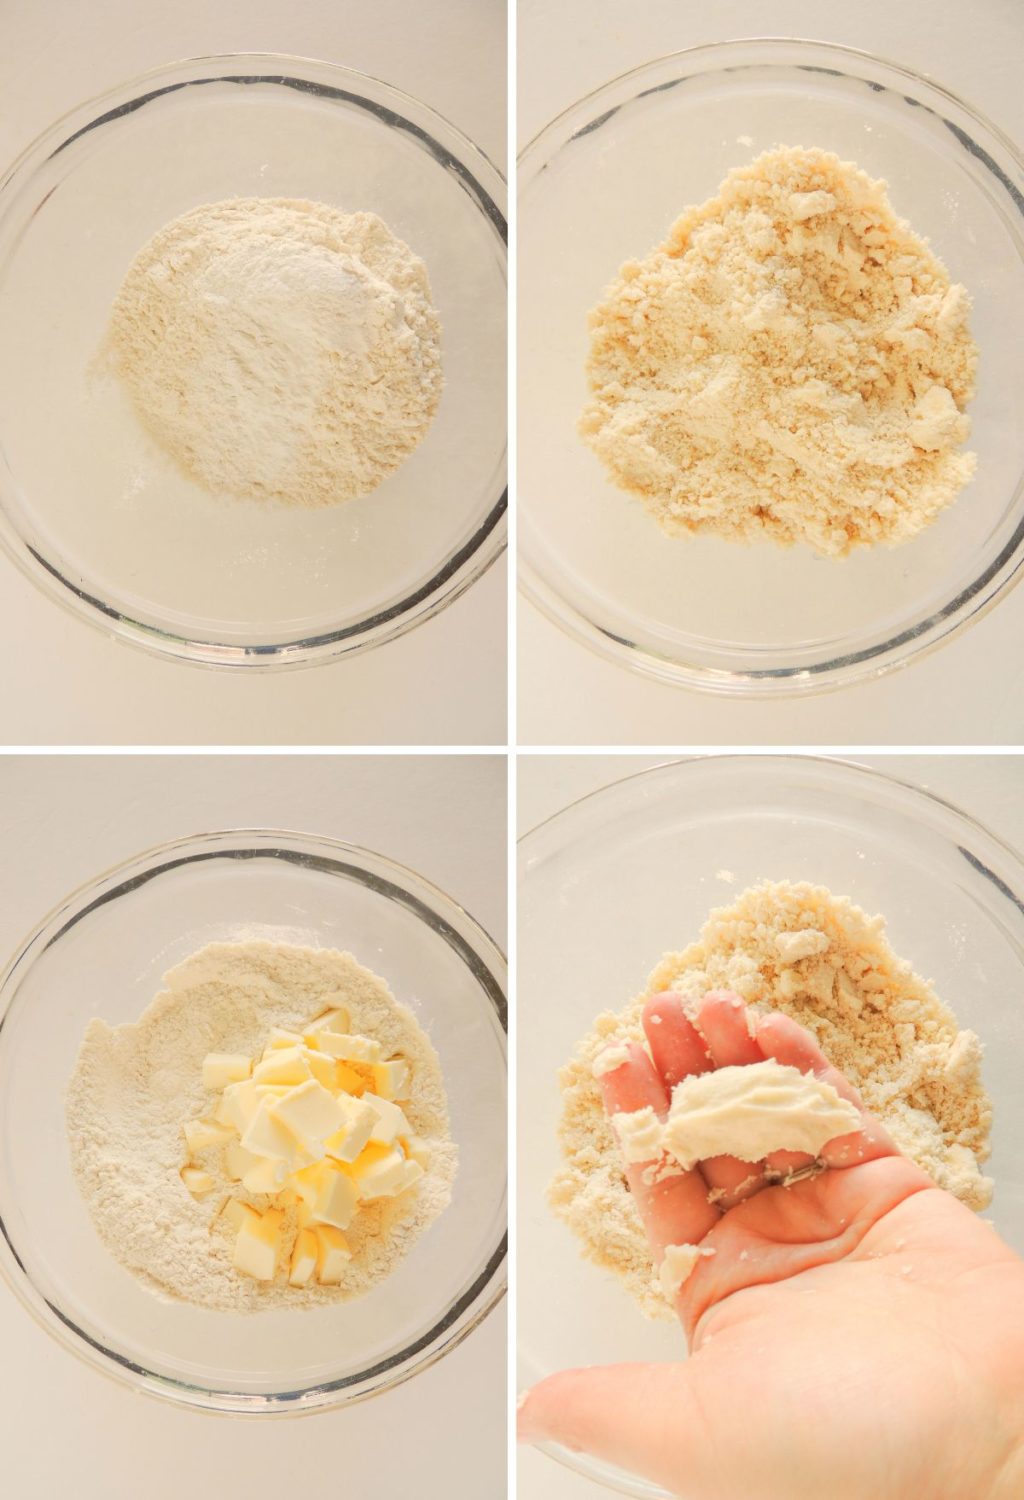 Four pictures showing the process of making a dough.